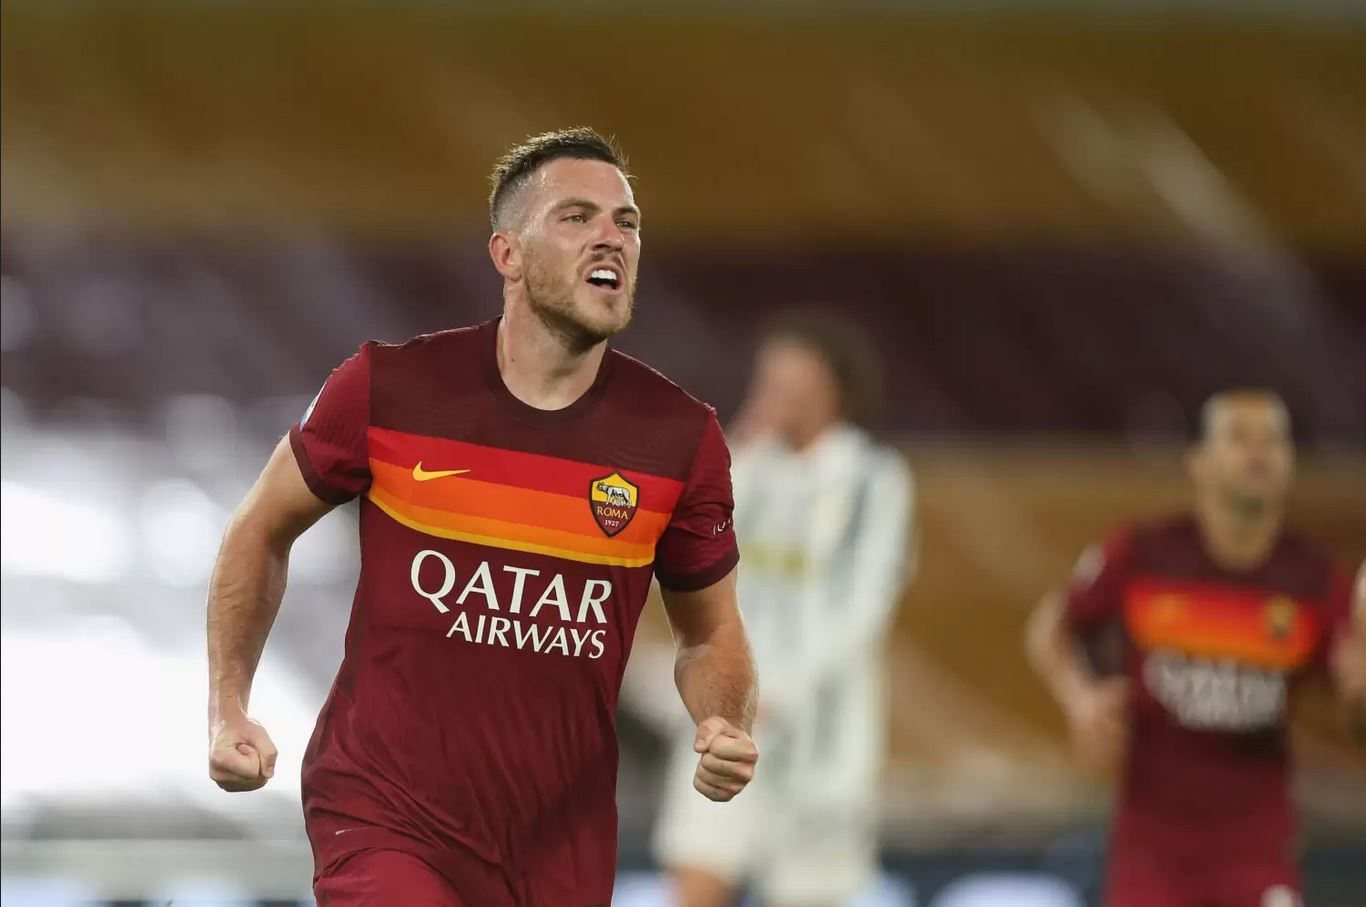 Jordan Veretout bagged a brace for Roma and gave Juventus quite a scare on Sunday night: He is our Roma's man of the match according to our player ratings 